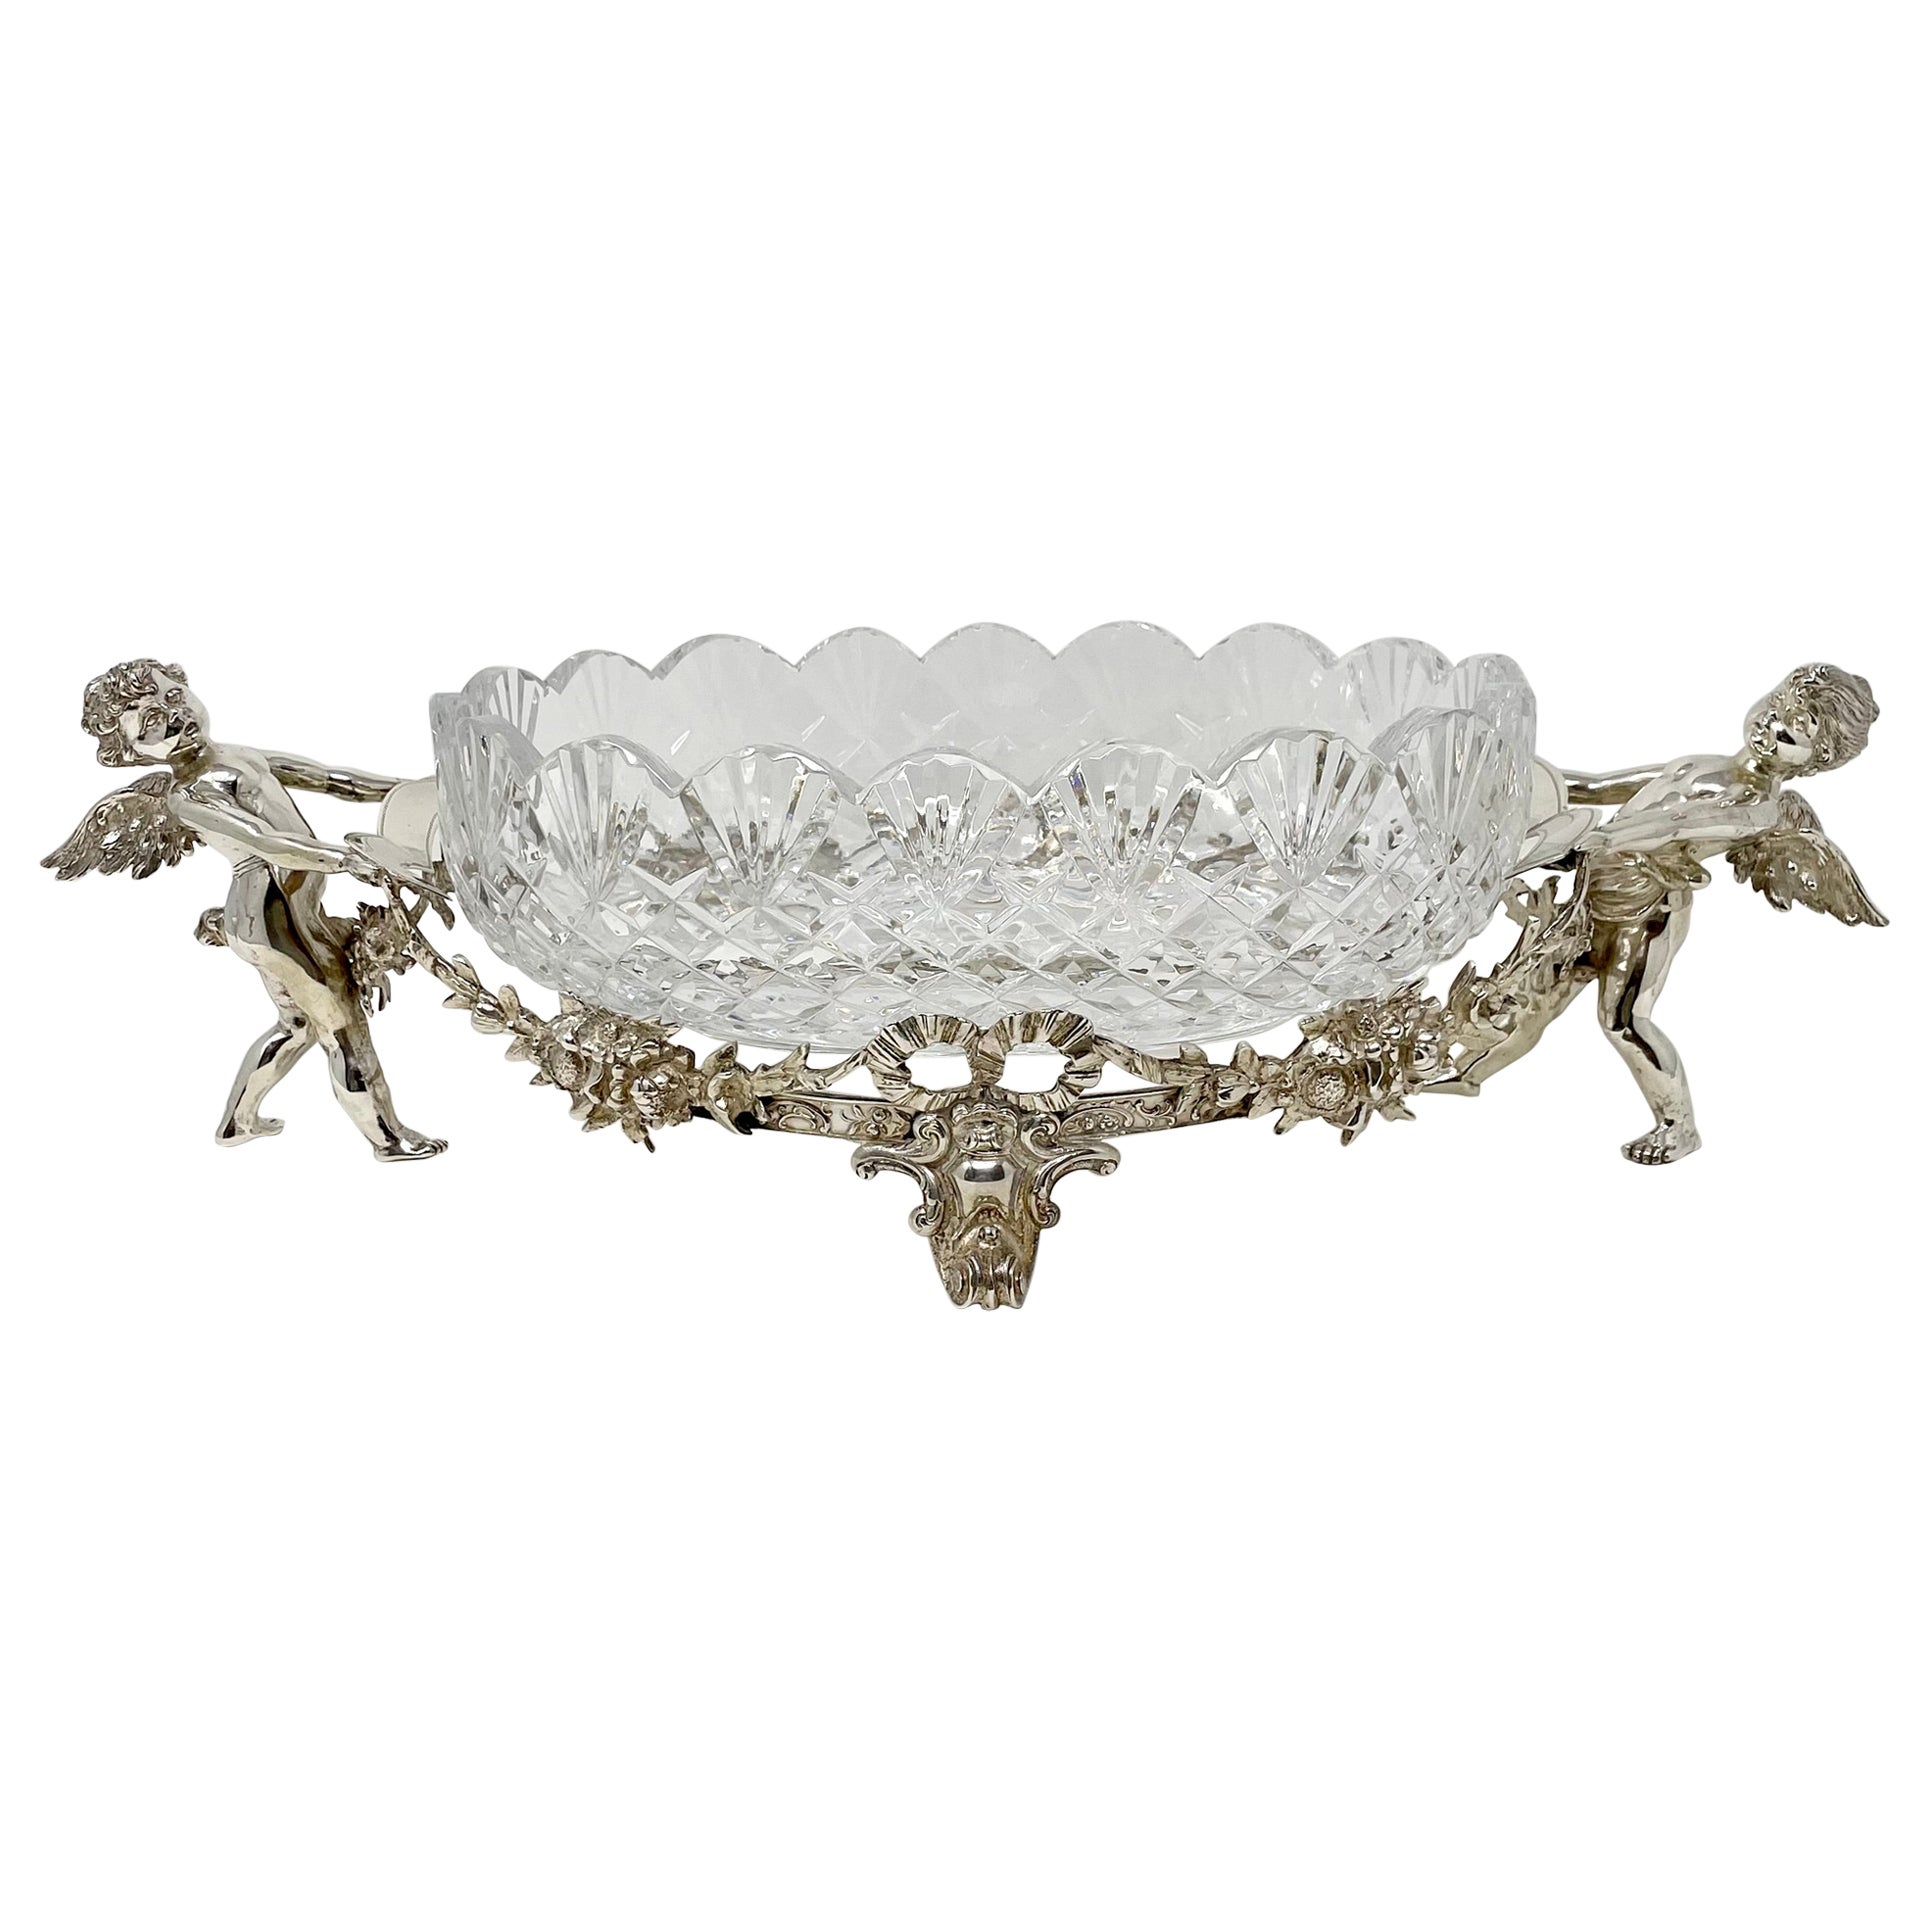 Antique French Cut Crystal & Silver on Bronze "Cherubs" Centerpiece, Circa 1890. For Sale